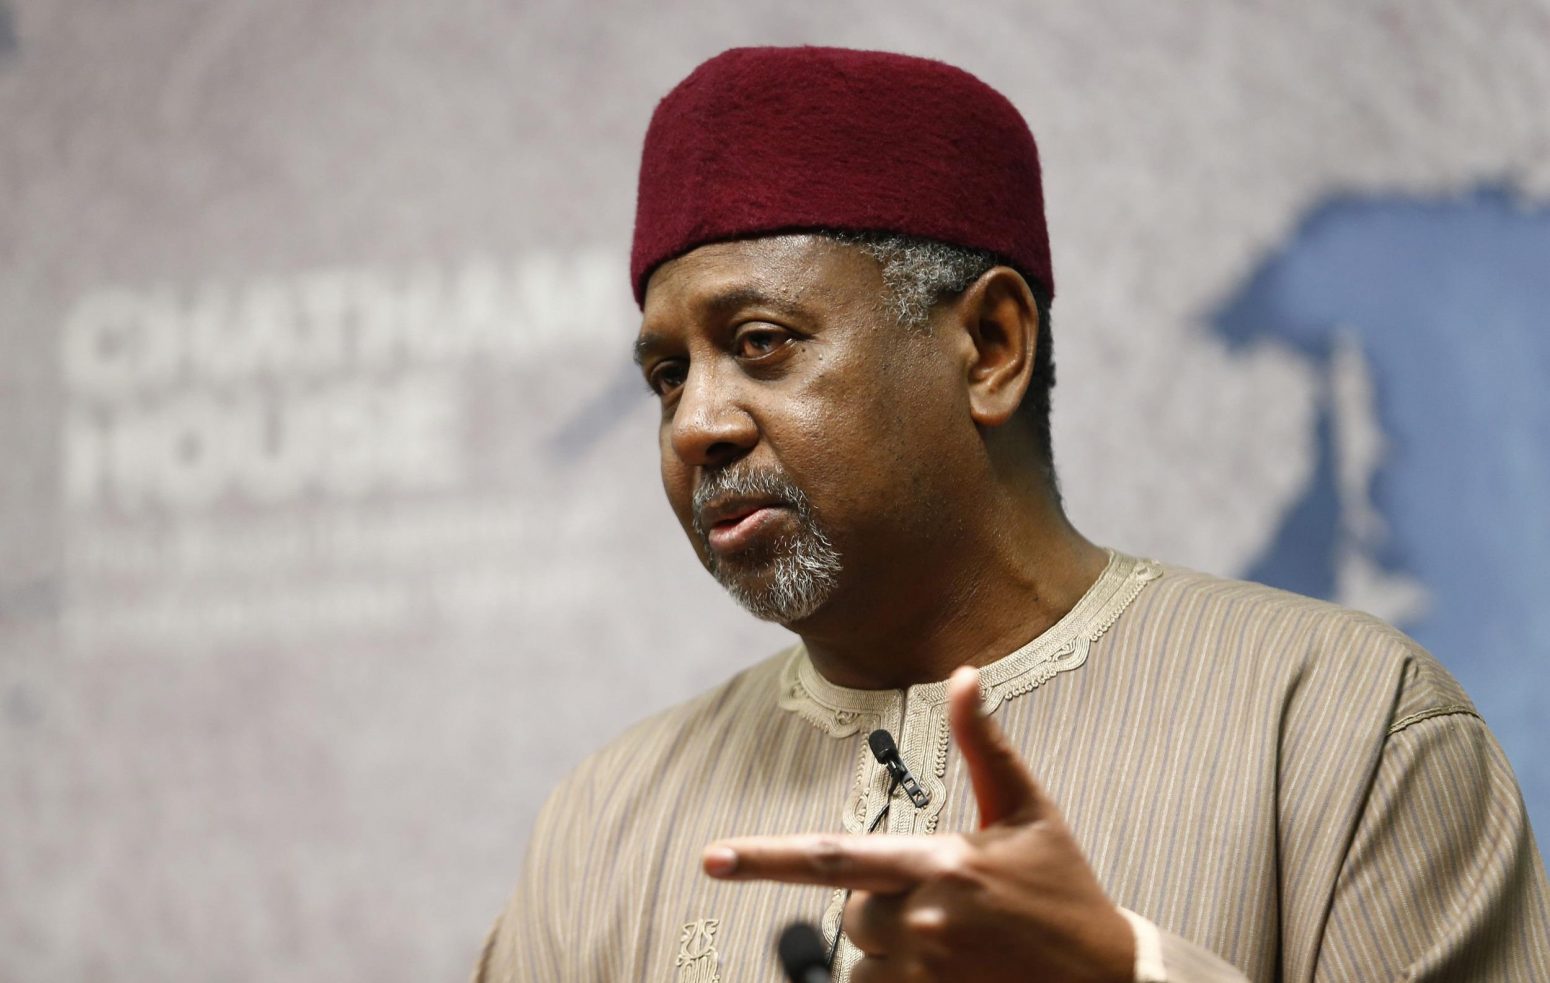 #Nigeria Bombshell: #Dasuki says Jonathan gave order for N10 billion cash to influence PDP convention delegates